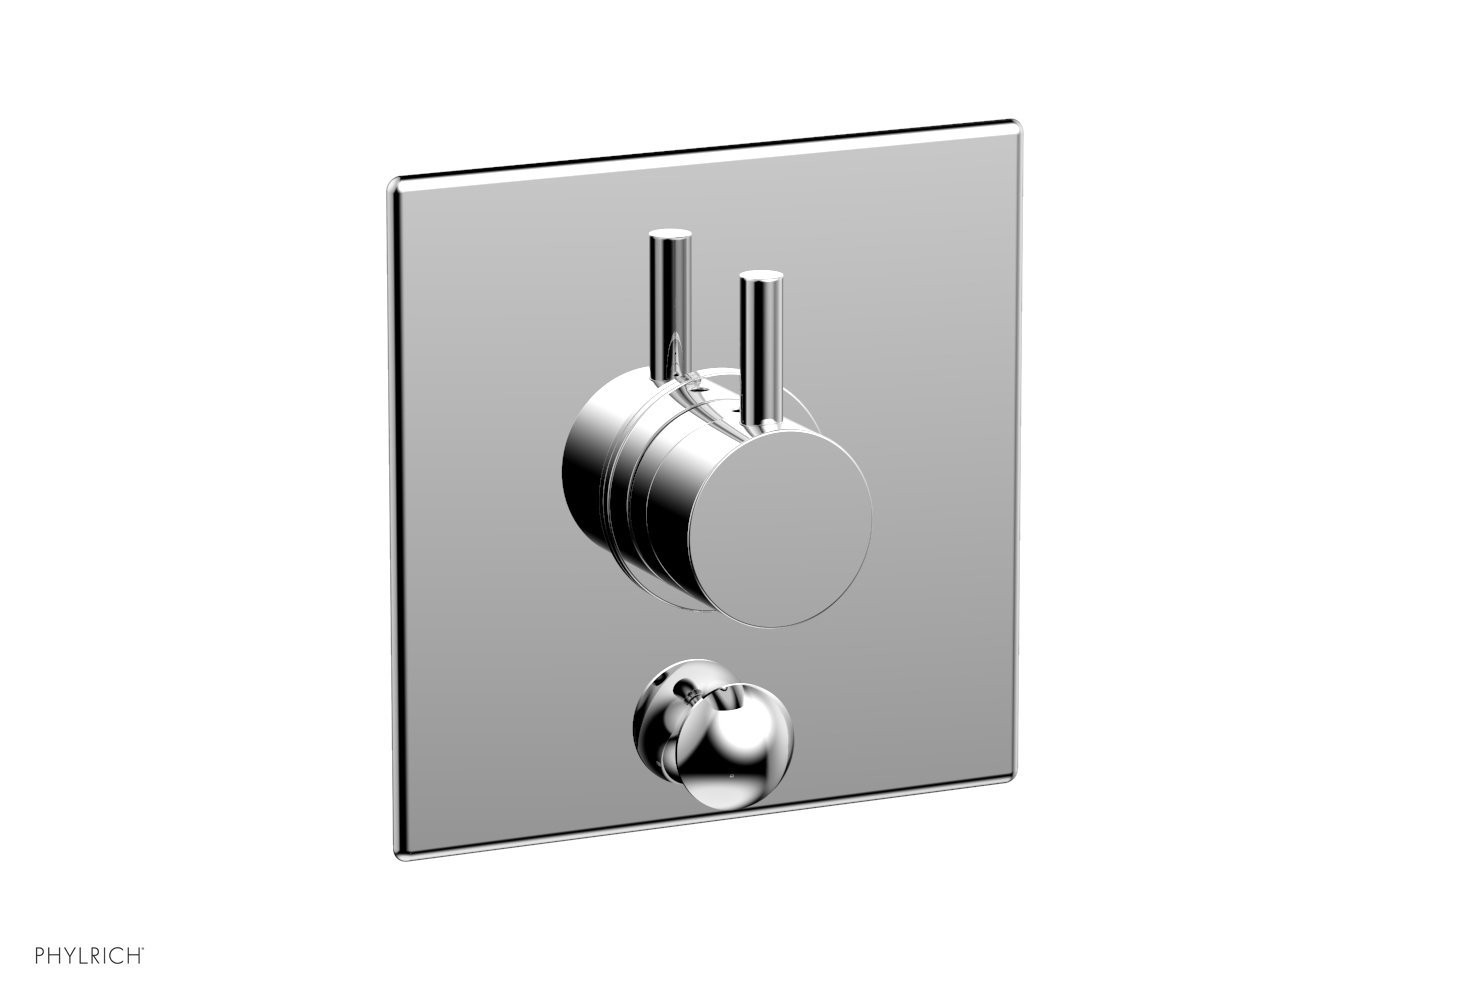 PHYLRICH 4-203 BASIC II WALL MOUNT PRESSURE BALANCE SHOWER PLATE WITH DIVERTER AND LEVER HANDLE TRIM